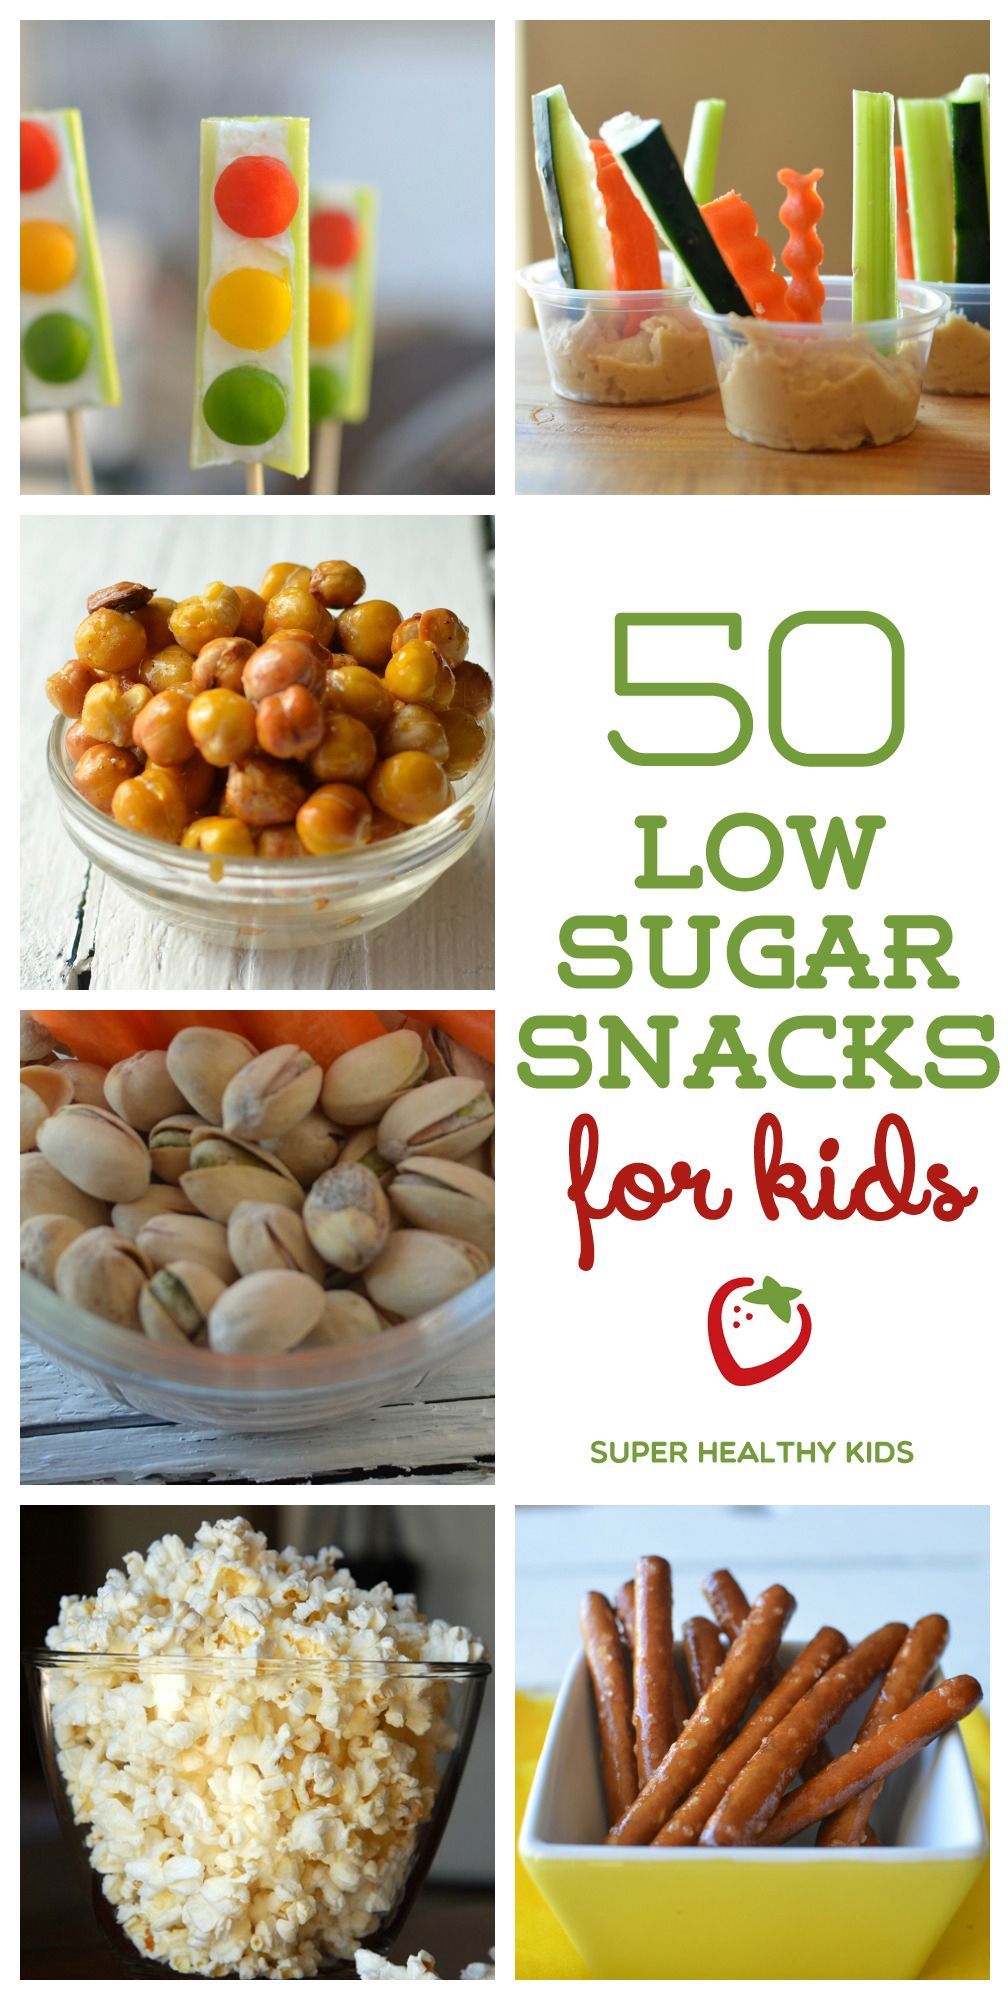 This is the best list Ive ever seen! 50 low sugar snack ideas that kids will love. www.superhealthykids.com